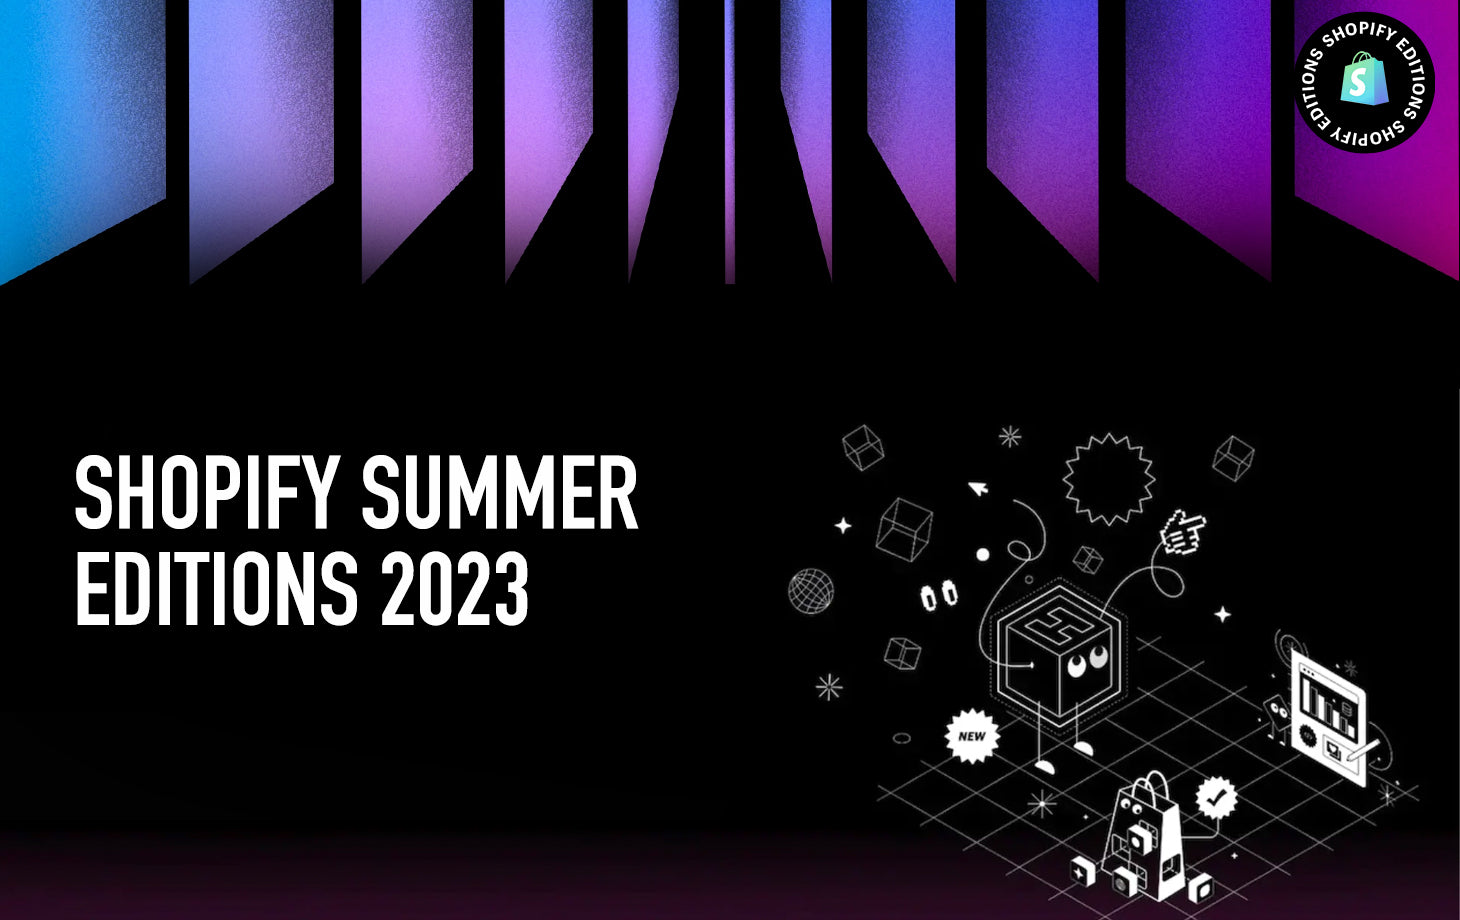 Shopify Summer Editions 2023 - All You Should Know